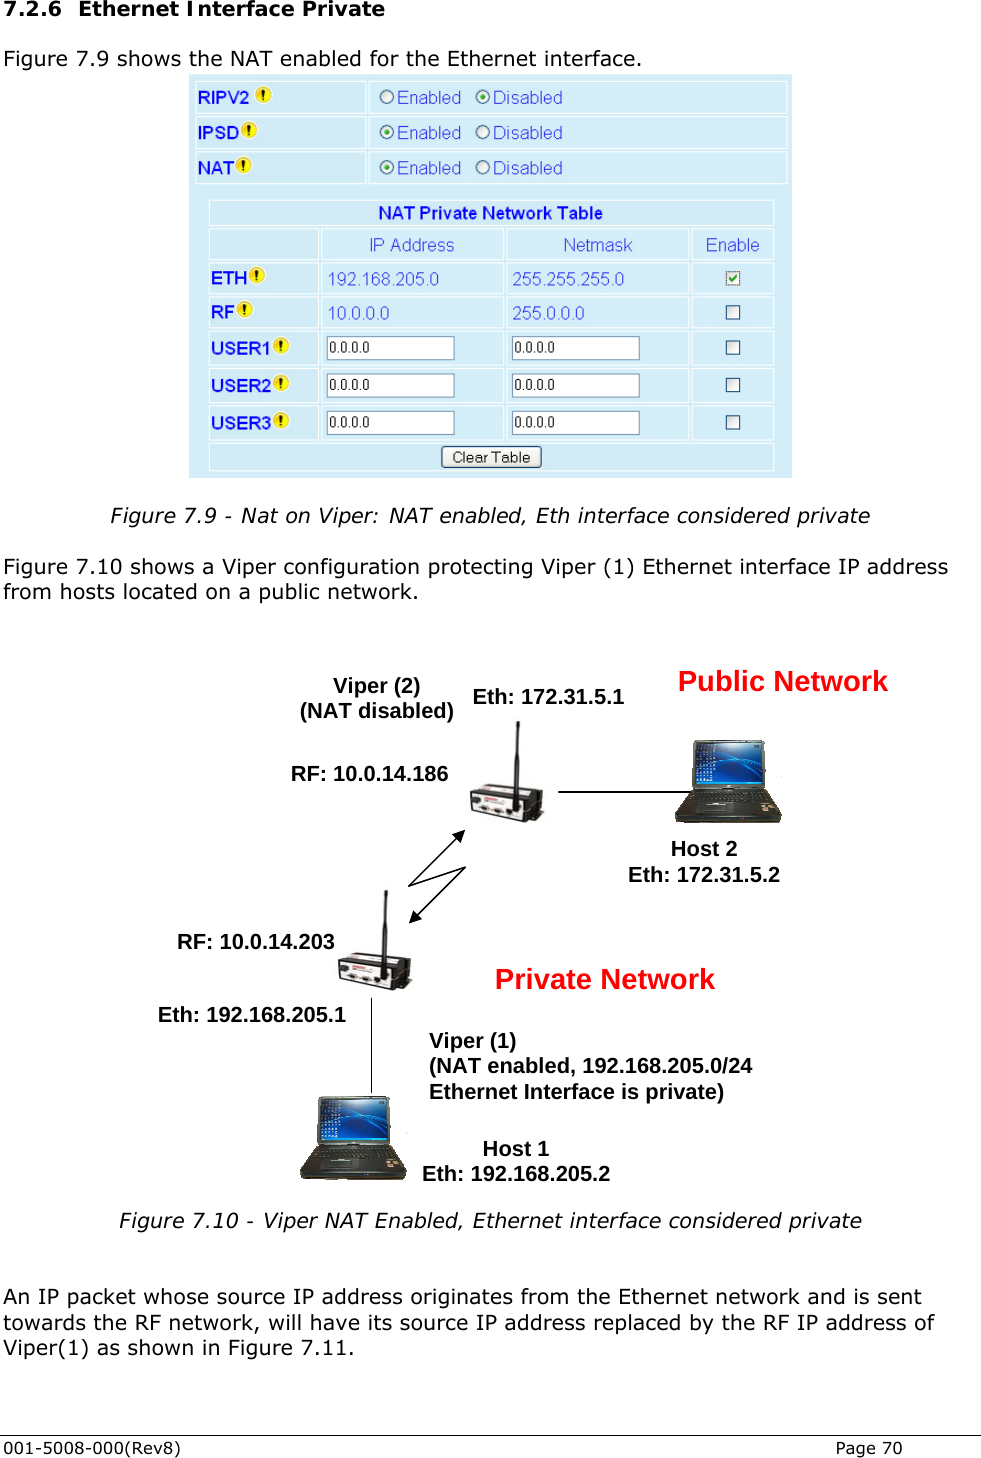  7.2.6 Ethernet Interface Private Figure 7.9 shows the NAT enabled for the Ethernet interface.  Figure 7.9 - Nat on Viper: NAT enabled, Eth interface considered private  Figure 7.10 shows a Viper configuration protecting Viper (1) Ethernet interface IP address from hosts located on a public network.    72.31.5.1  Public NetworkViper (2) 001-5008-000(Rev8)   Page 70  Eth: 1(NAT disabled)          Figure 7.10 - Viper NAT Enabled, Ethernet interface considered private   An IP packet whose source IP address originates from the Ethernet network and is sent towards the RF network, will have its source IP address replaced by the RF IP address of Viper(1) as shown in Figure 7.11.  RF: 10.0.14.203 0.0.14.186Eth: 192.168.205.1  Viper (1) RF: 1Host 2 Eth: 172.31.5.2 (NAT enabled, 192.168.205.0/24 Ethernet Interface is private) Host 1 .205.2Private NetworkEth: 192.168